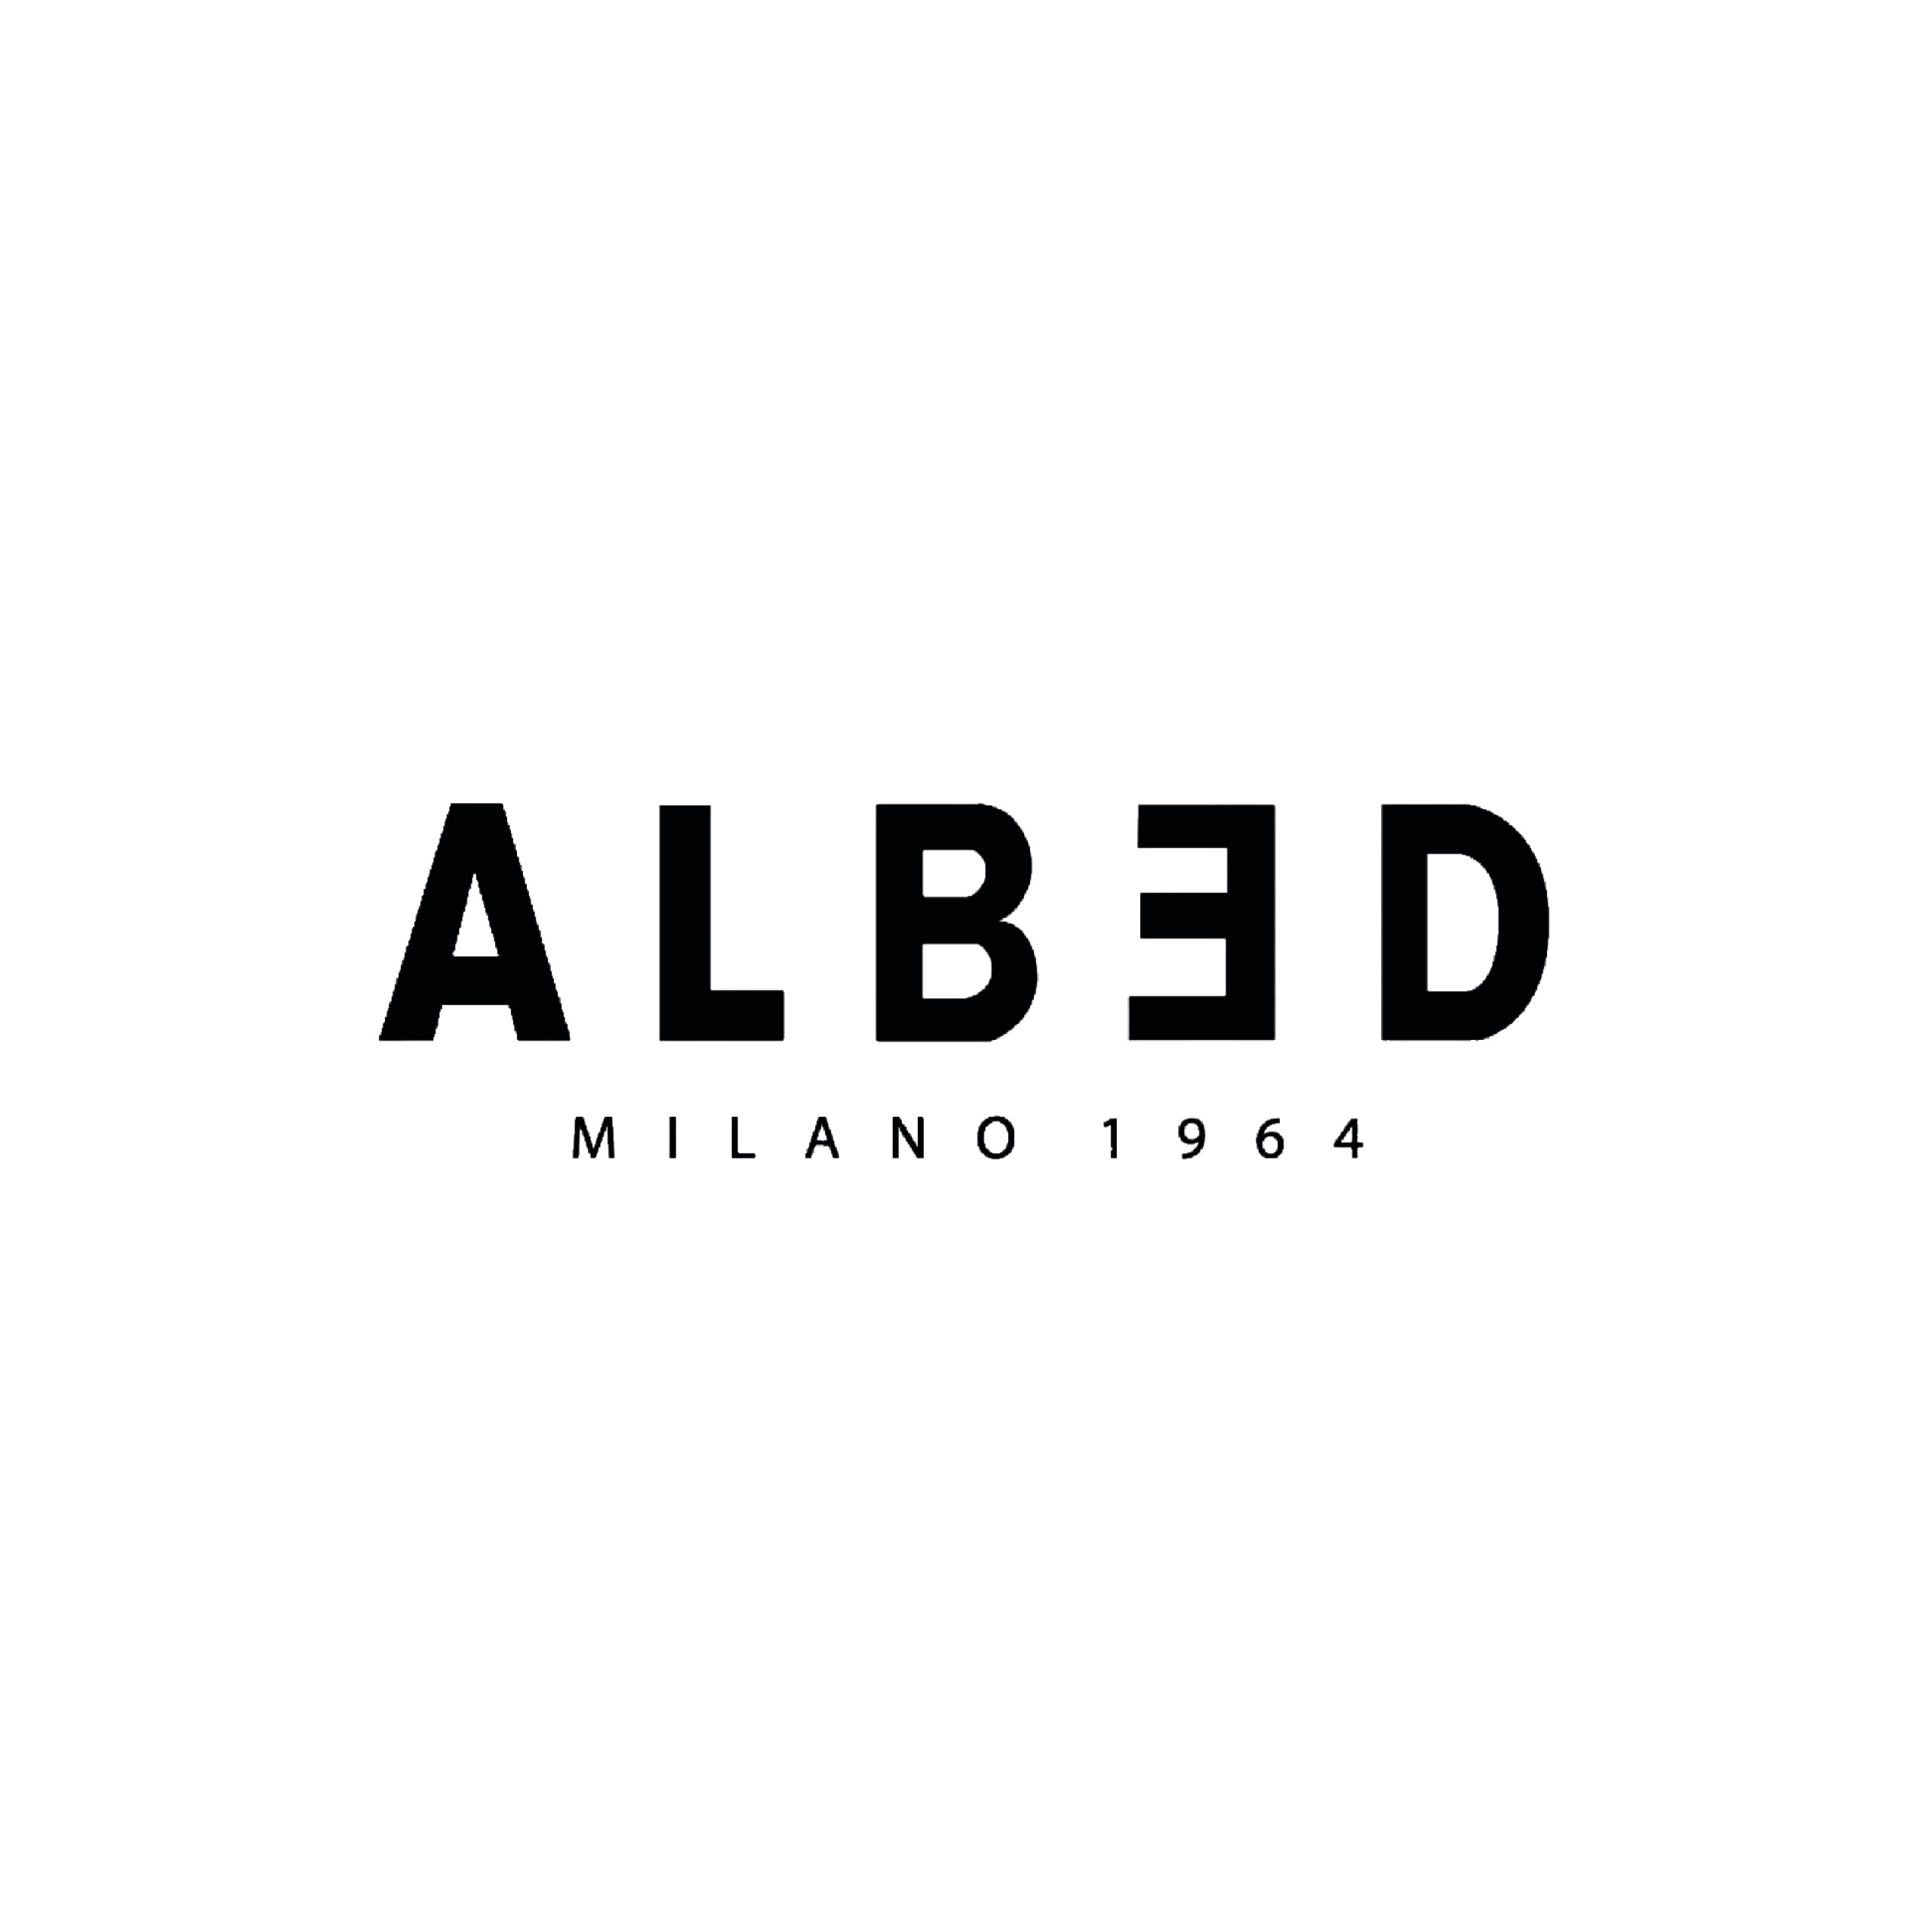 albed